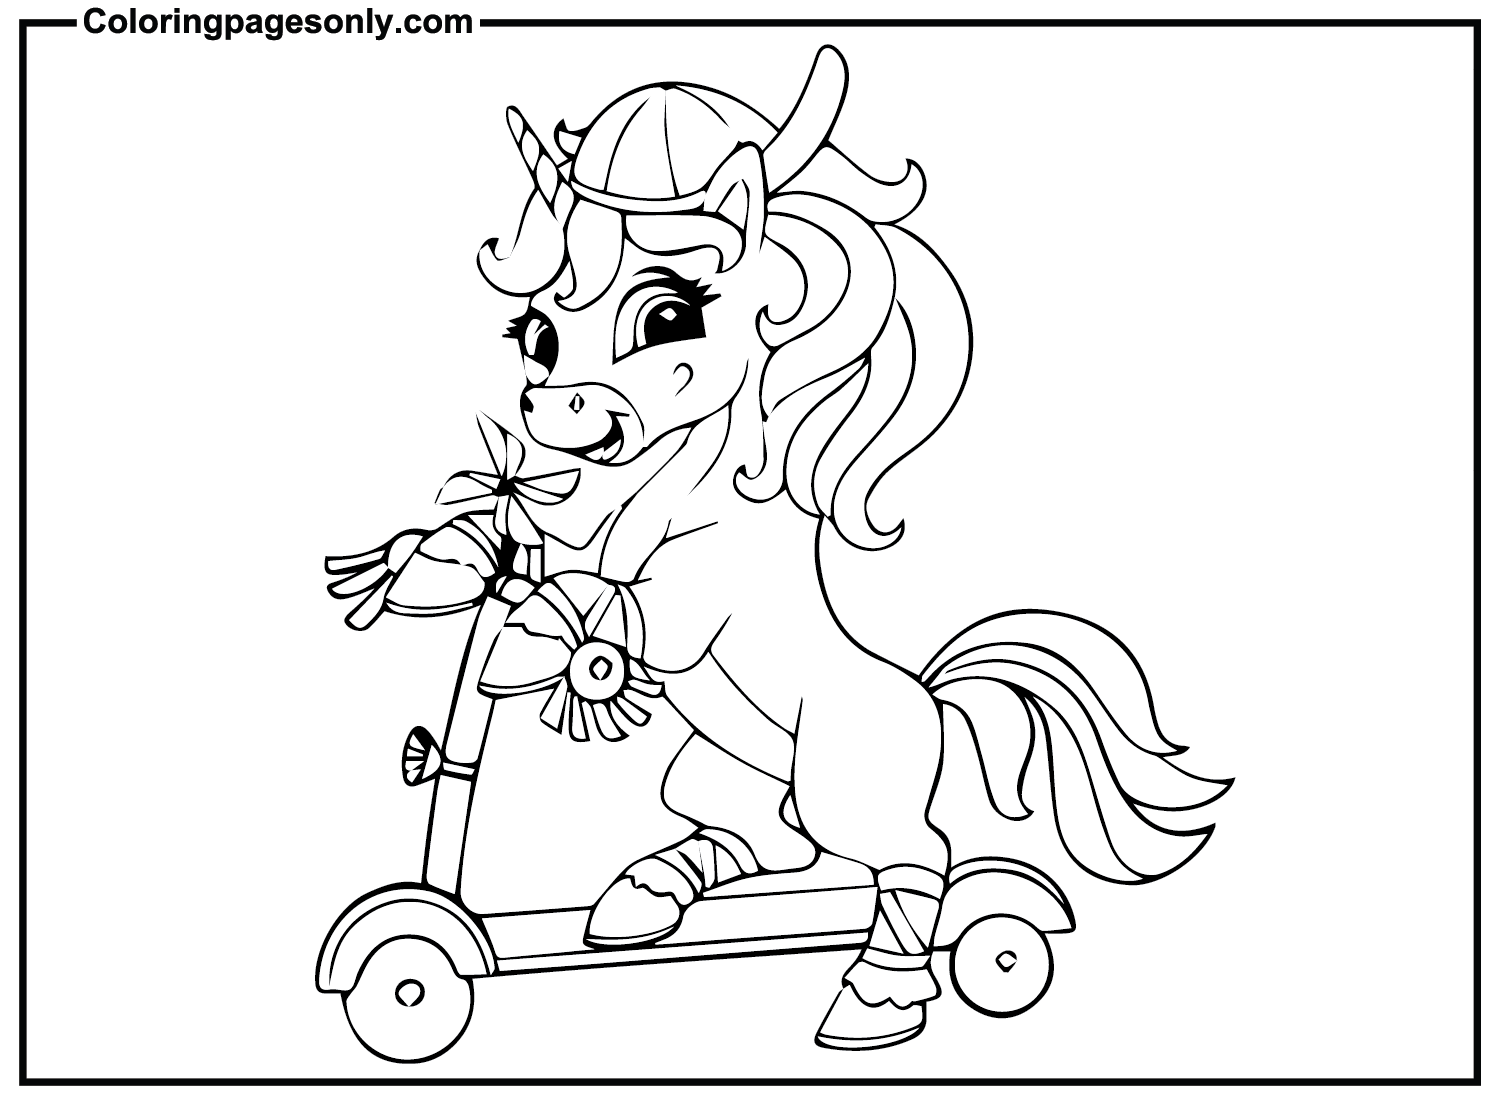 Floof Rainbow Rangers Coloring Pages